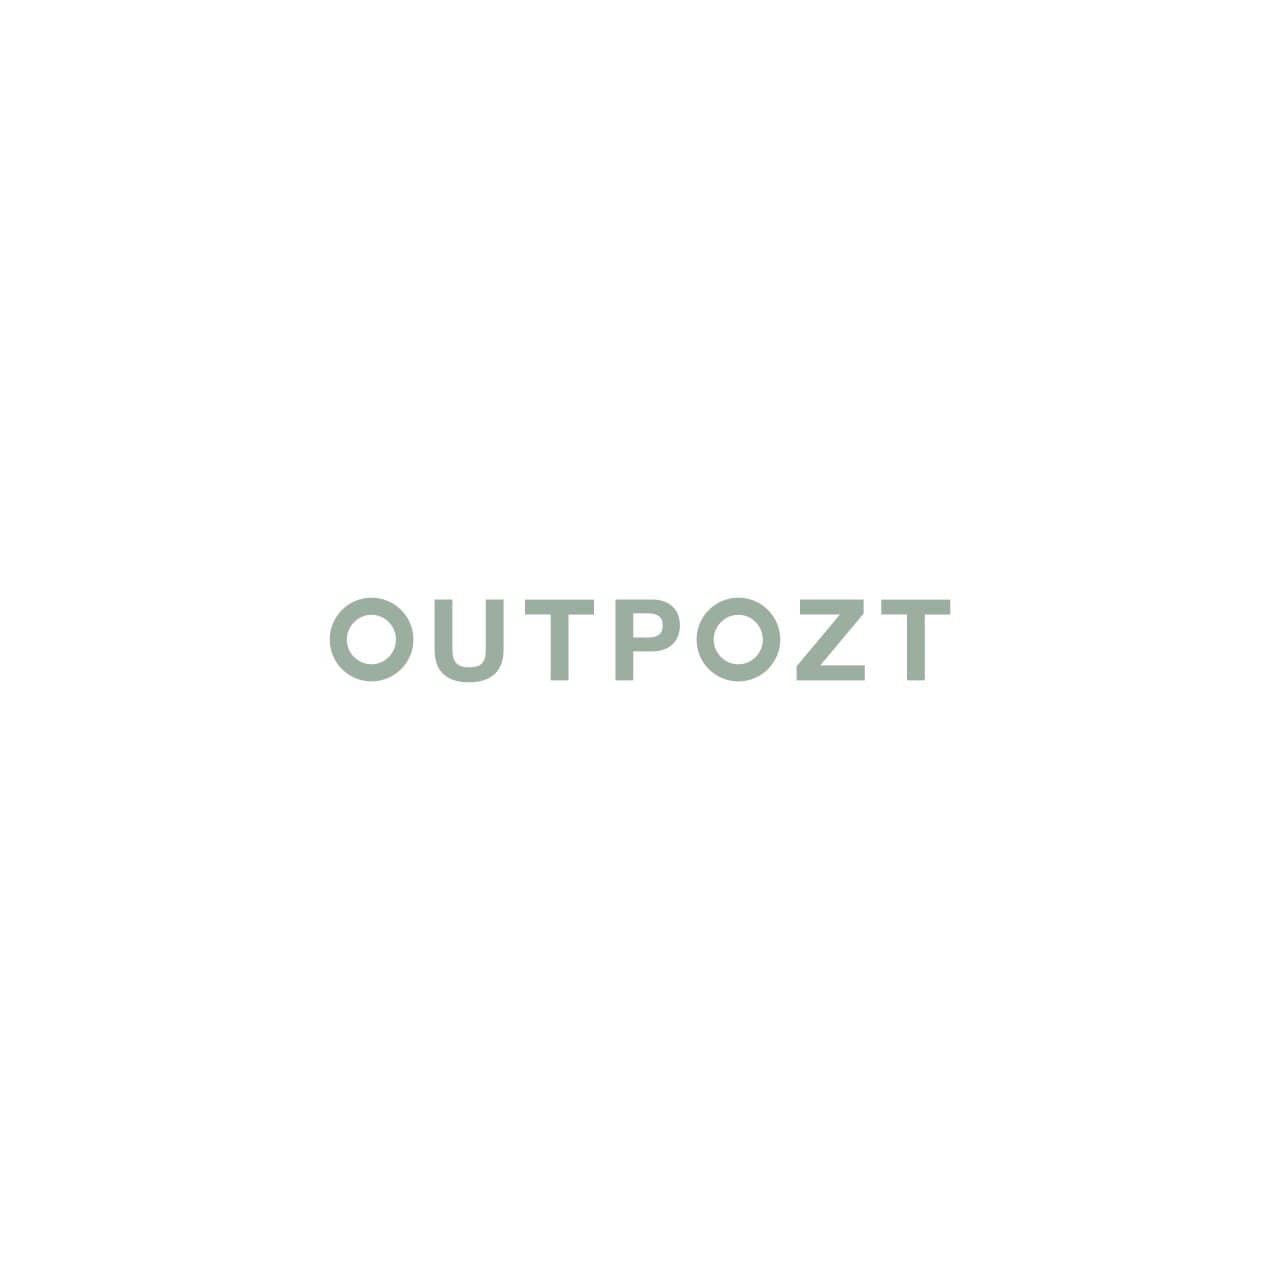 Outpozt (L1-7A PM)